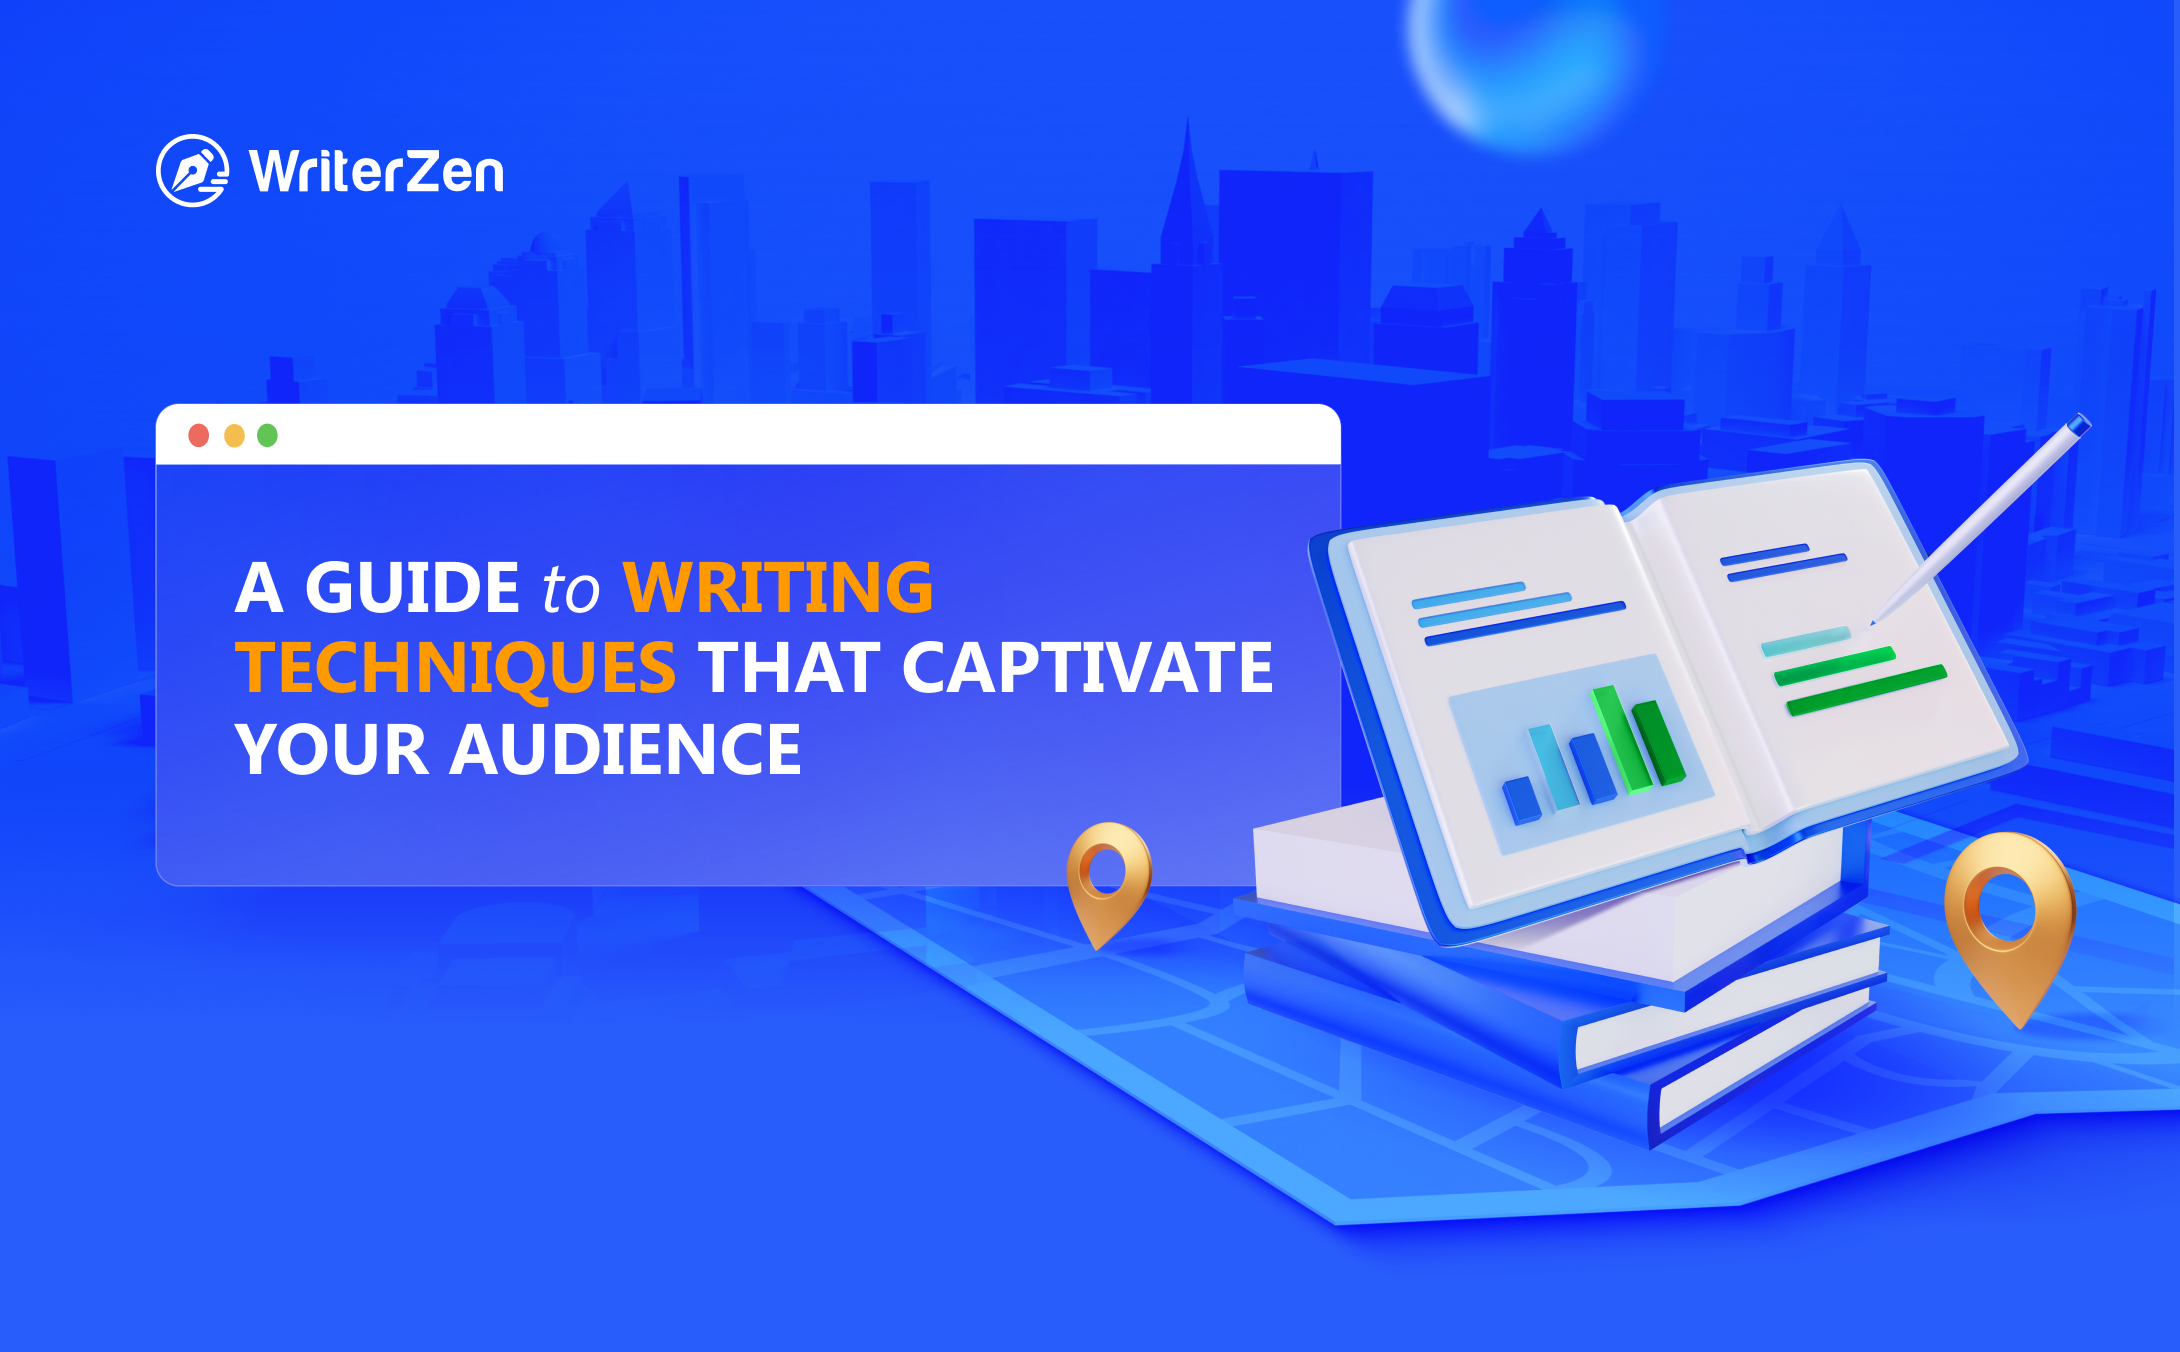 A Guide to Writing Techniques that Captivate Your Audience